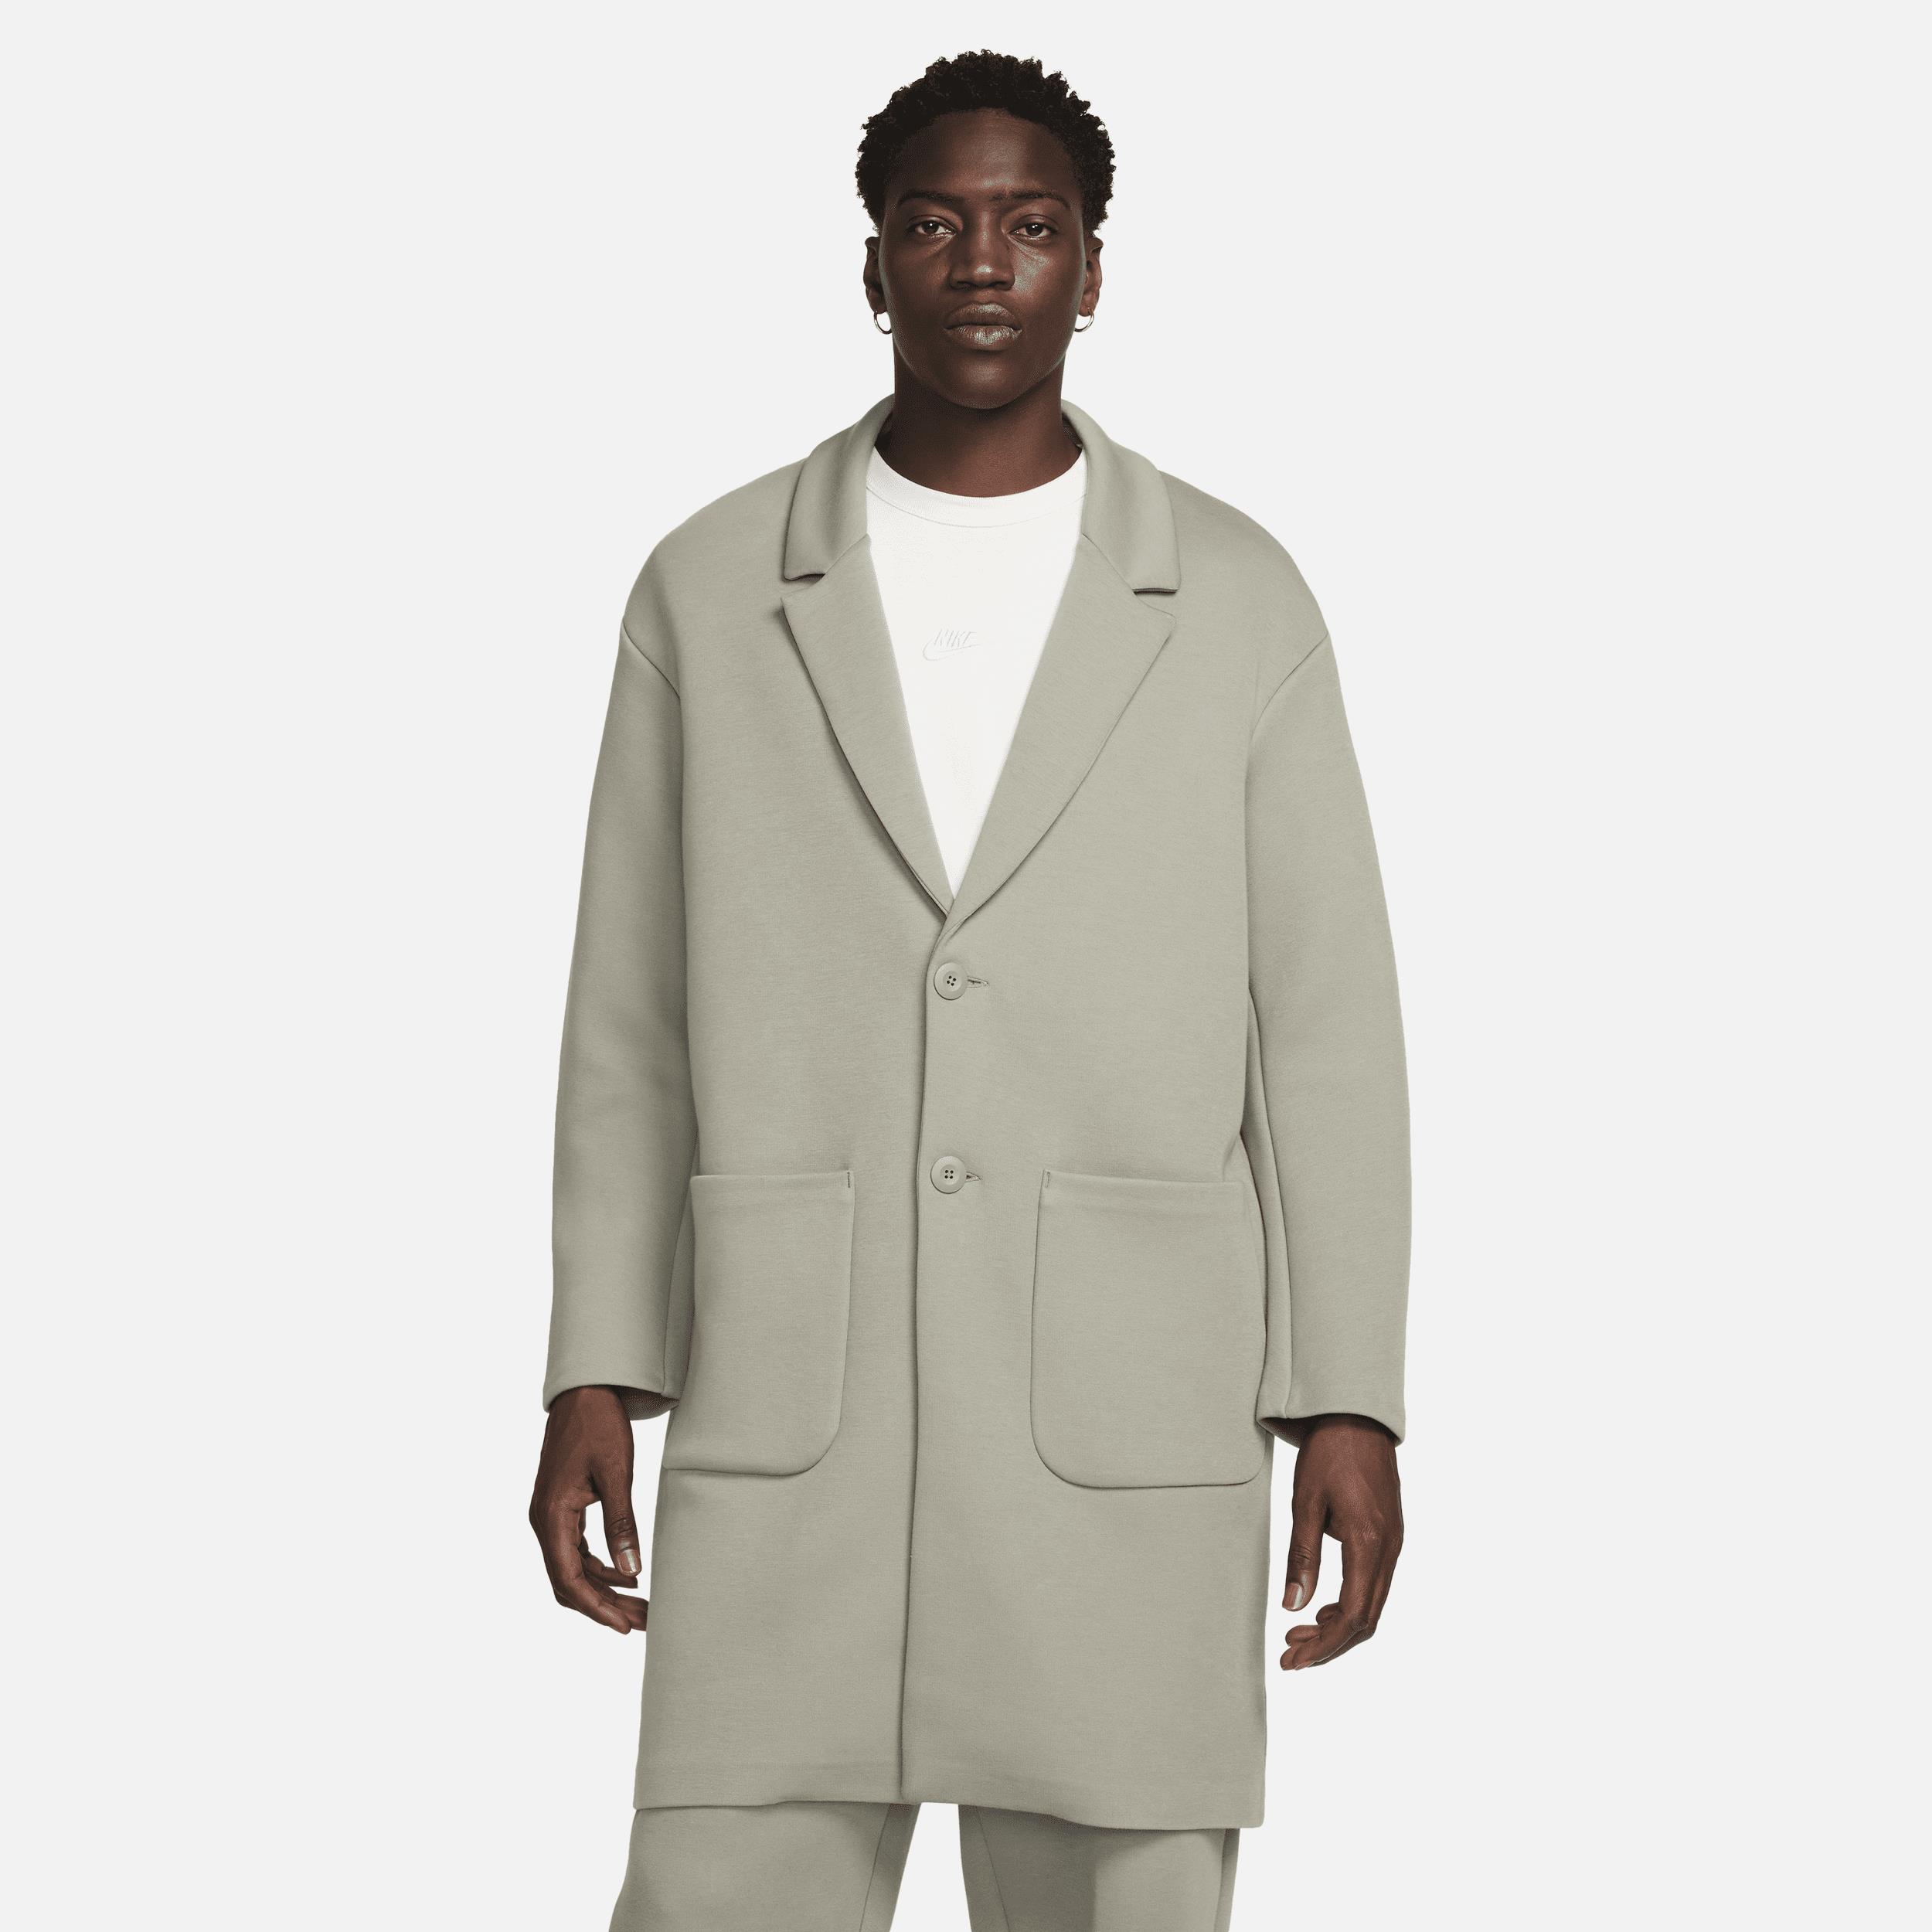 Nike Sportswear Tech Fleece Re-Imagined Men's Loose Fit Trench Coat - Grey - 50% Recycled Polyester